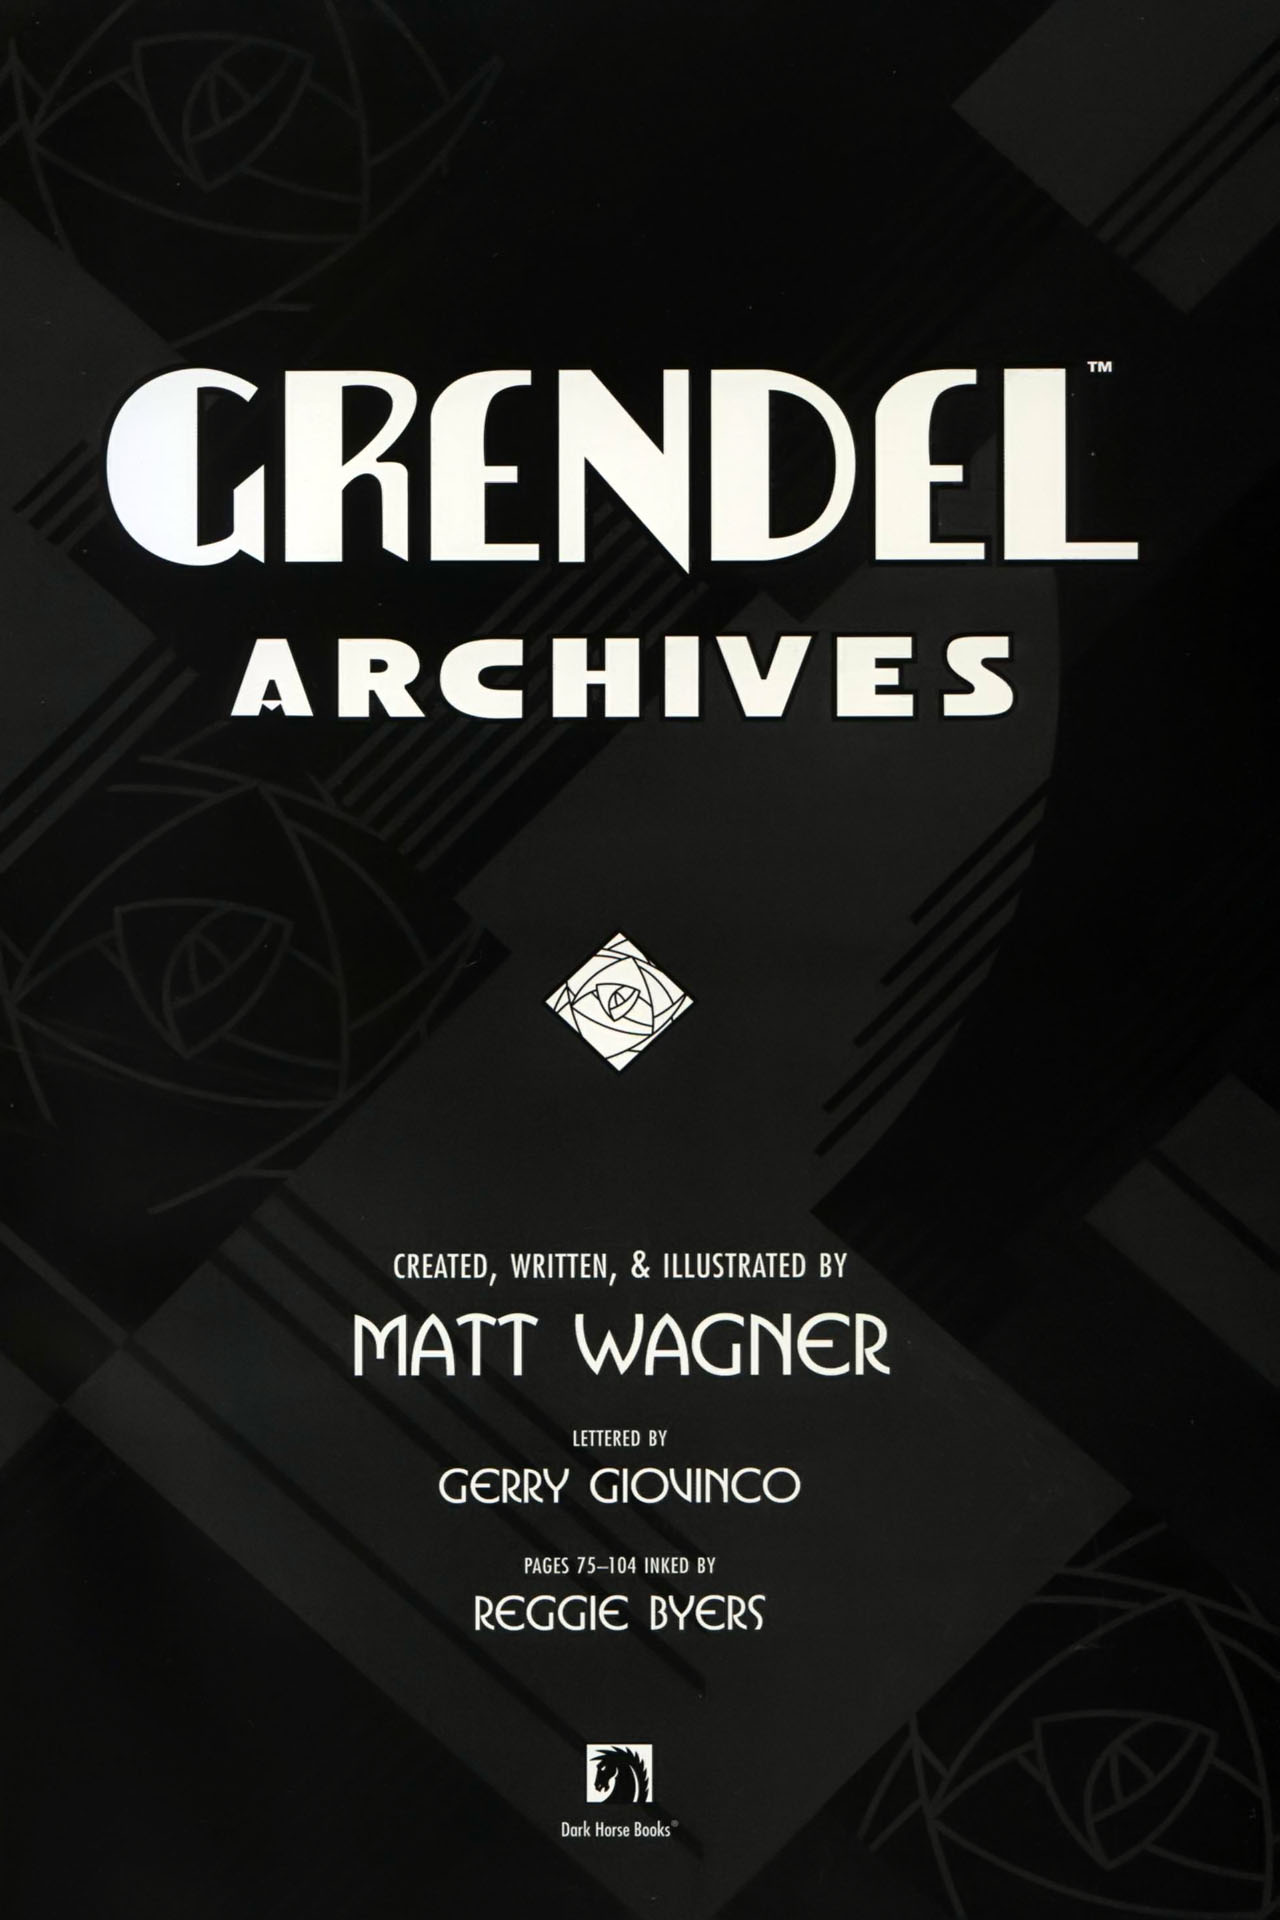 Read online Grendel Archives comic -  Issue # TPB - 2